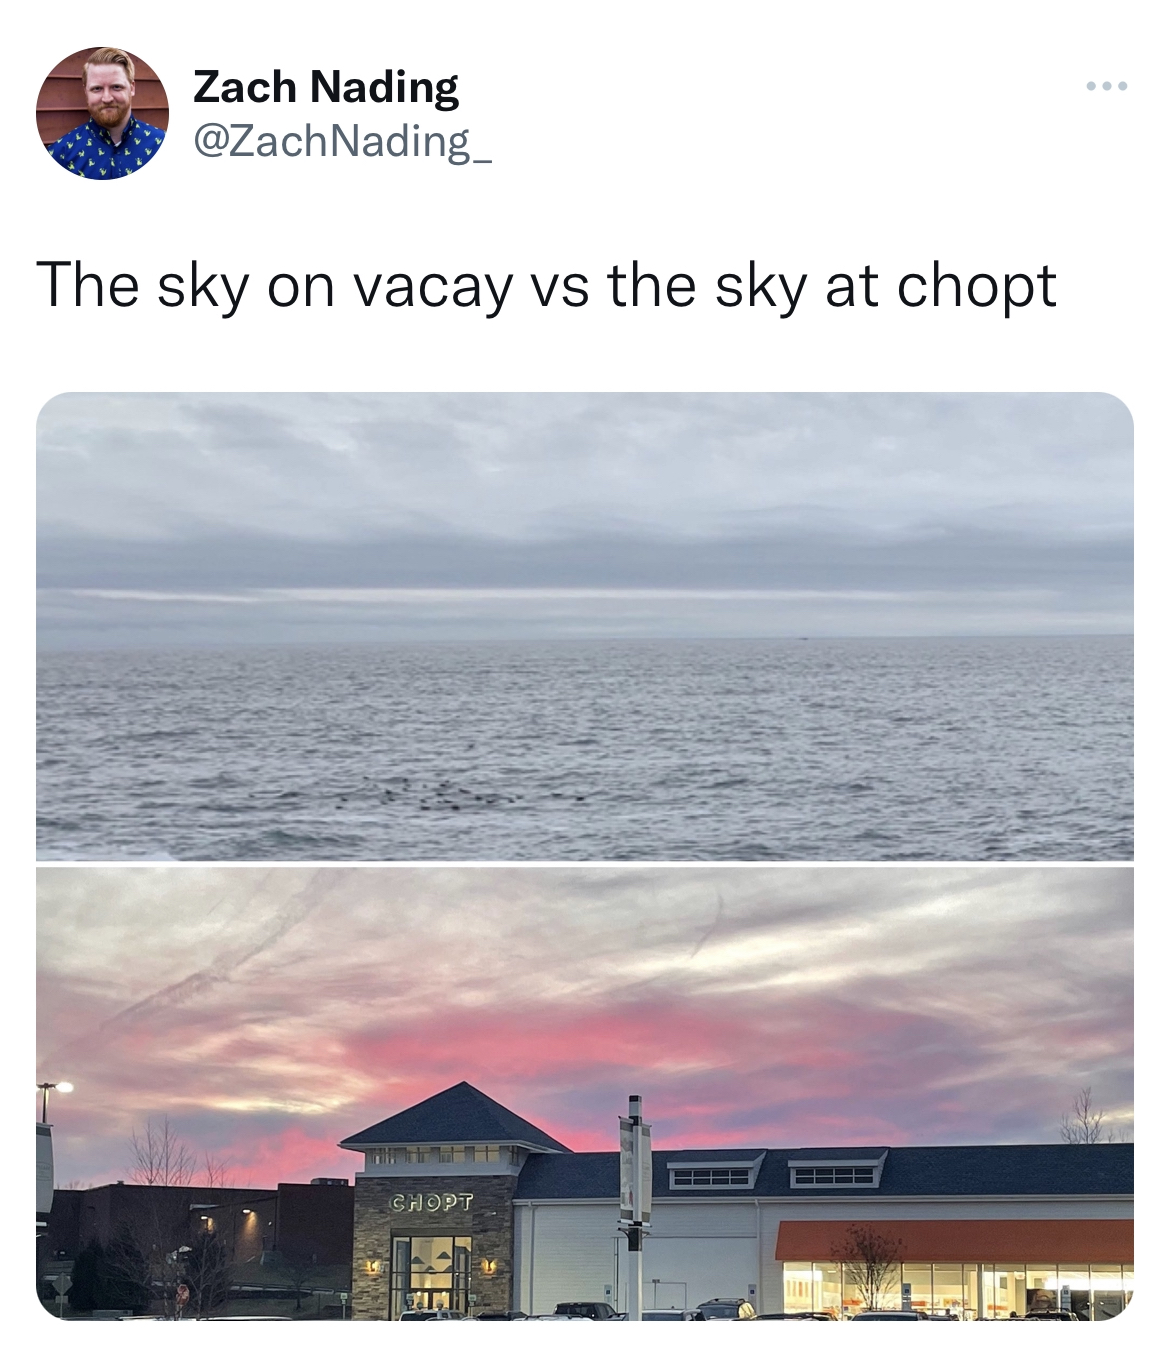 savage and absurd tweets - sky - Zach Nading The sky on vacay vs the sky at chopt Shopt